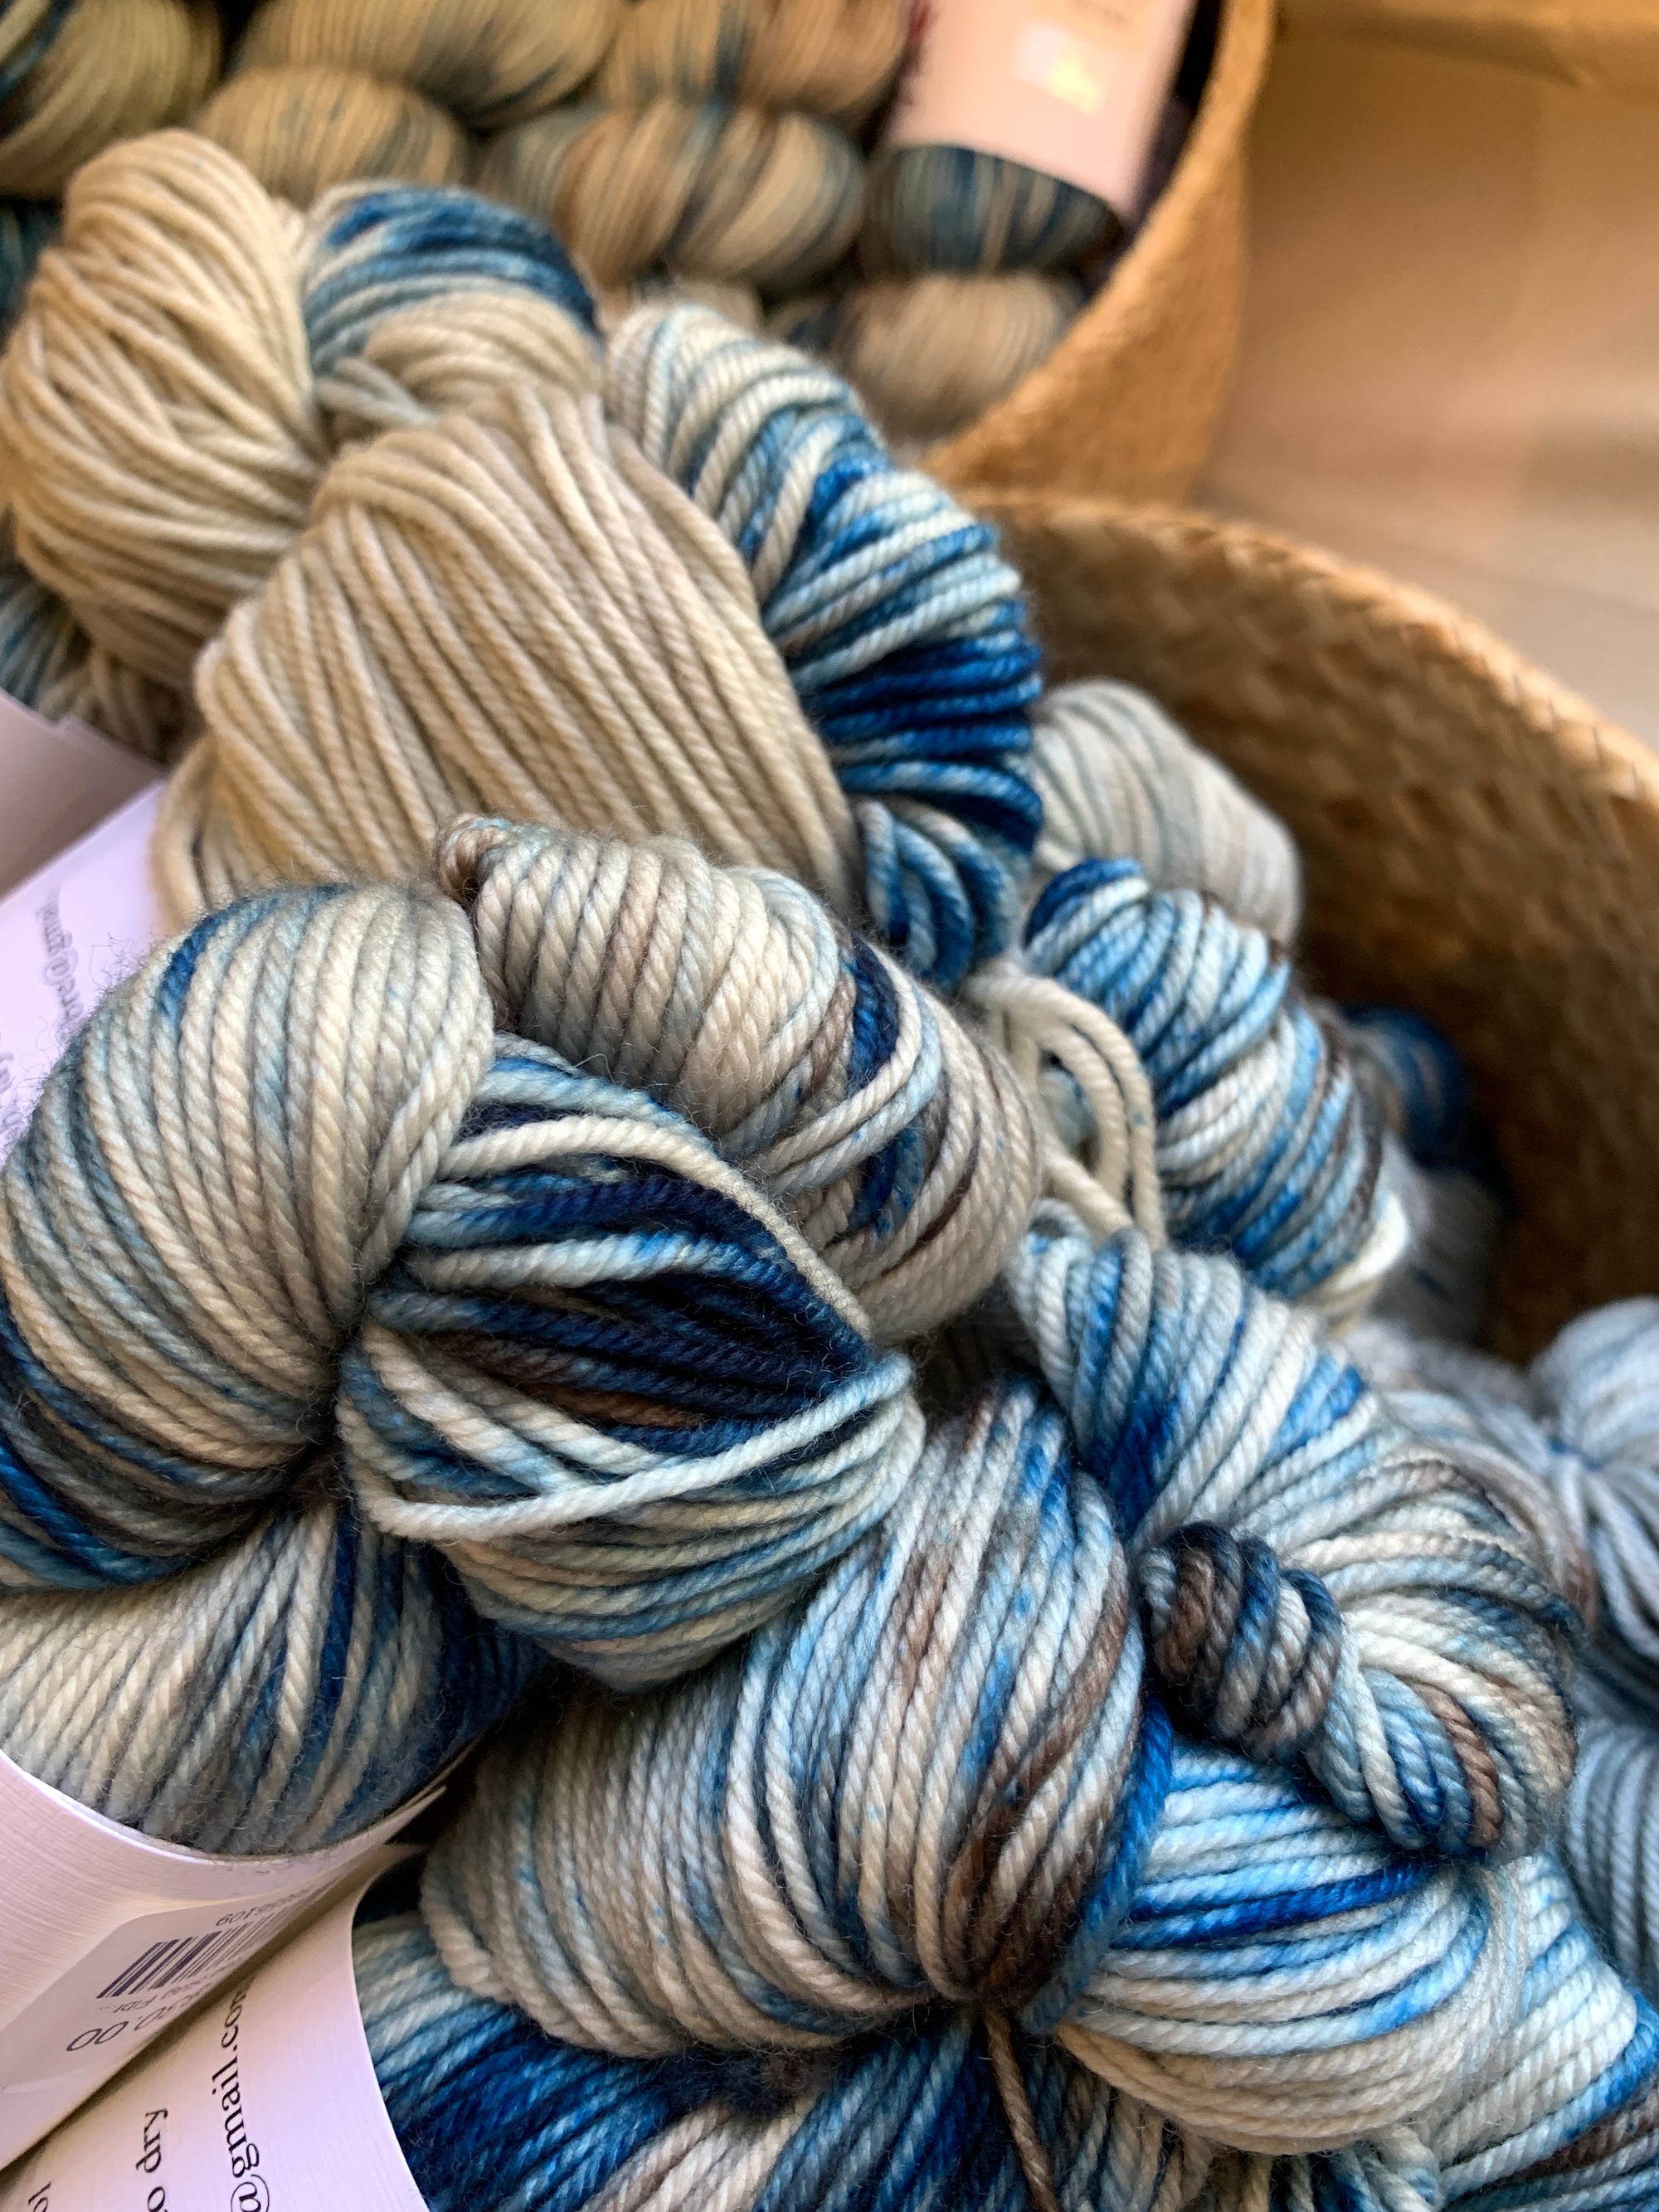 Red Stag Fibre Yarn: Shop Exclusive Sunset Cliffs